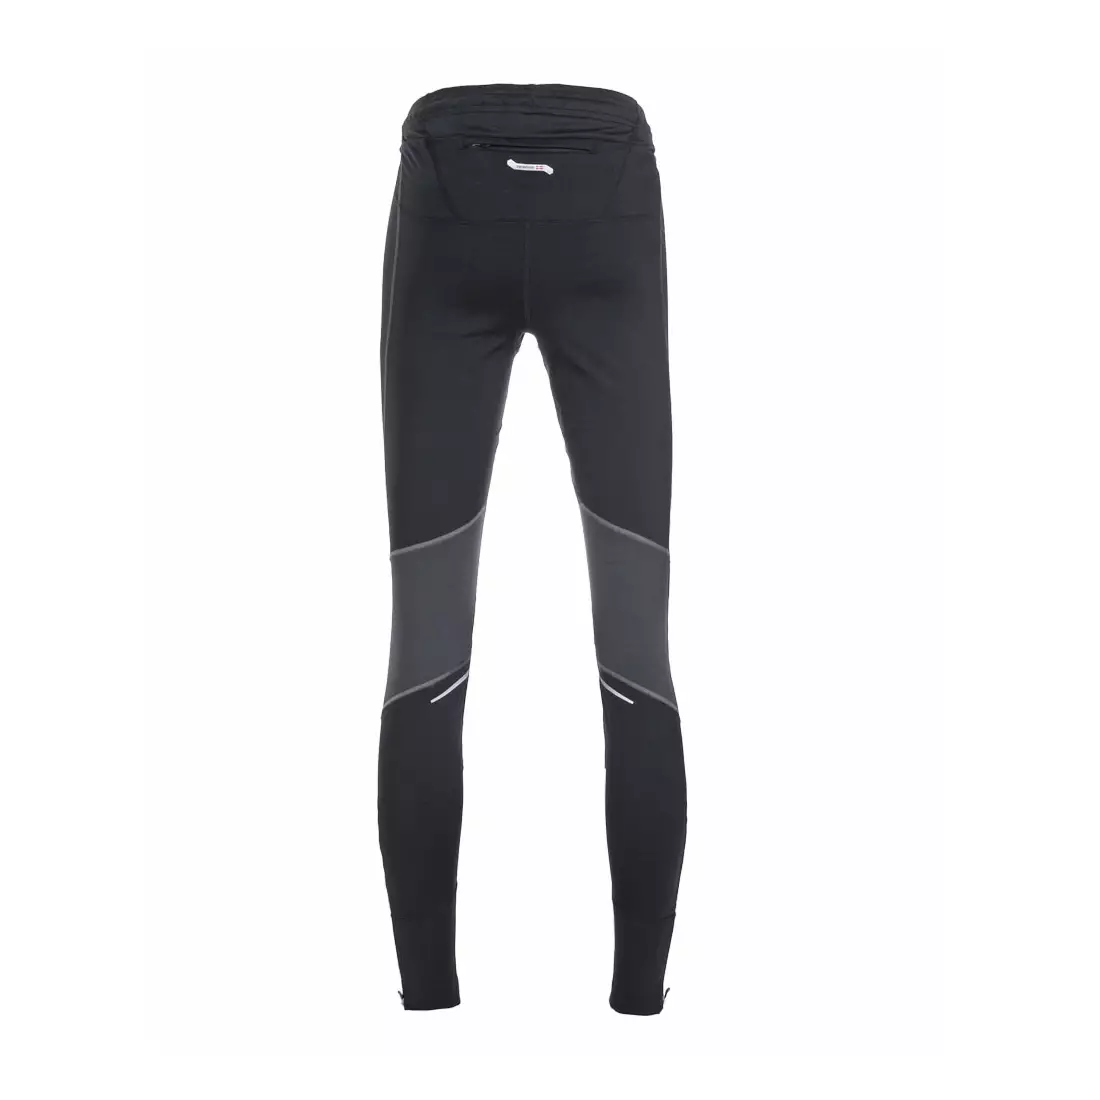 NEWLINE ICONIC PROTECT TIGHTS 10132-060 - women's insulated running pants, color: Black